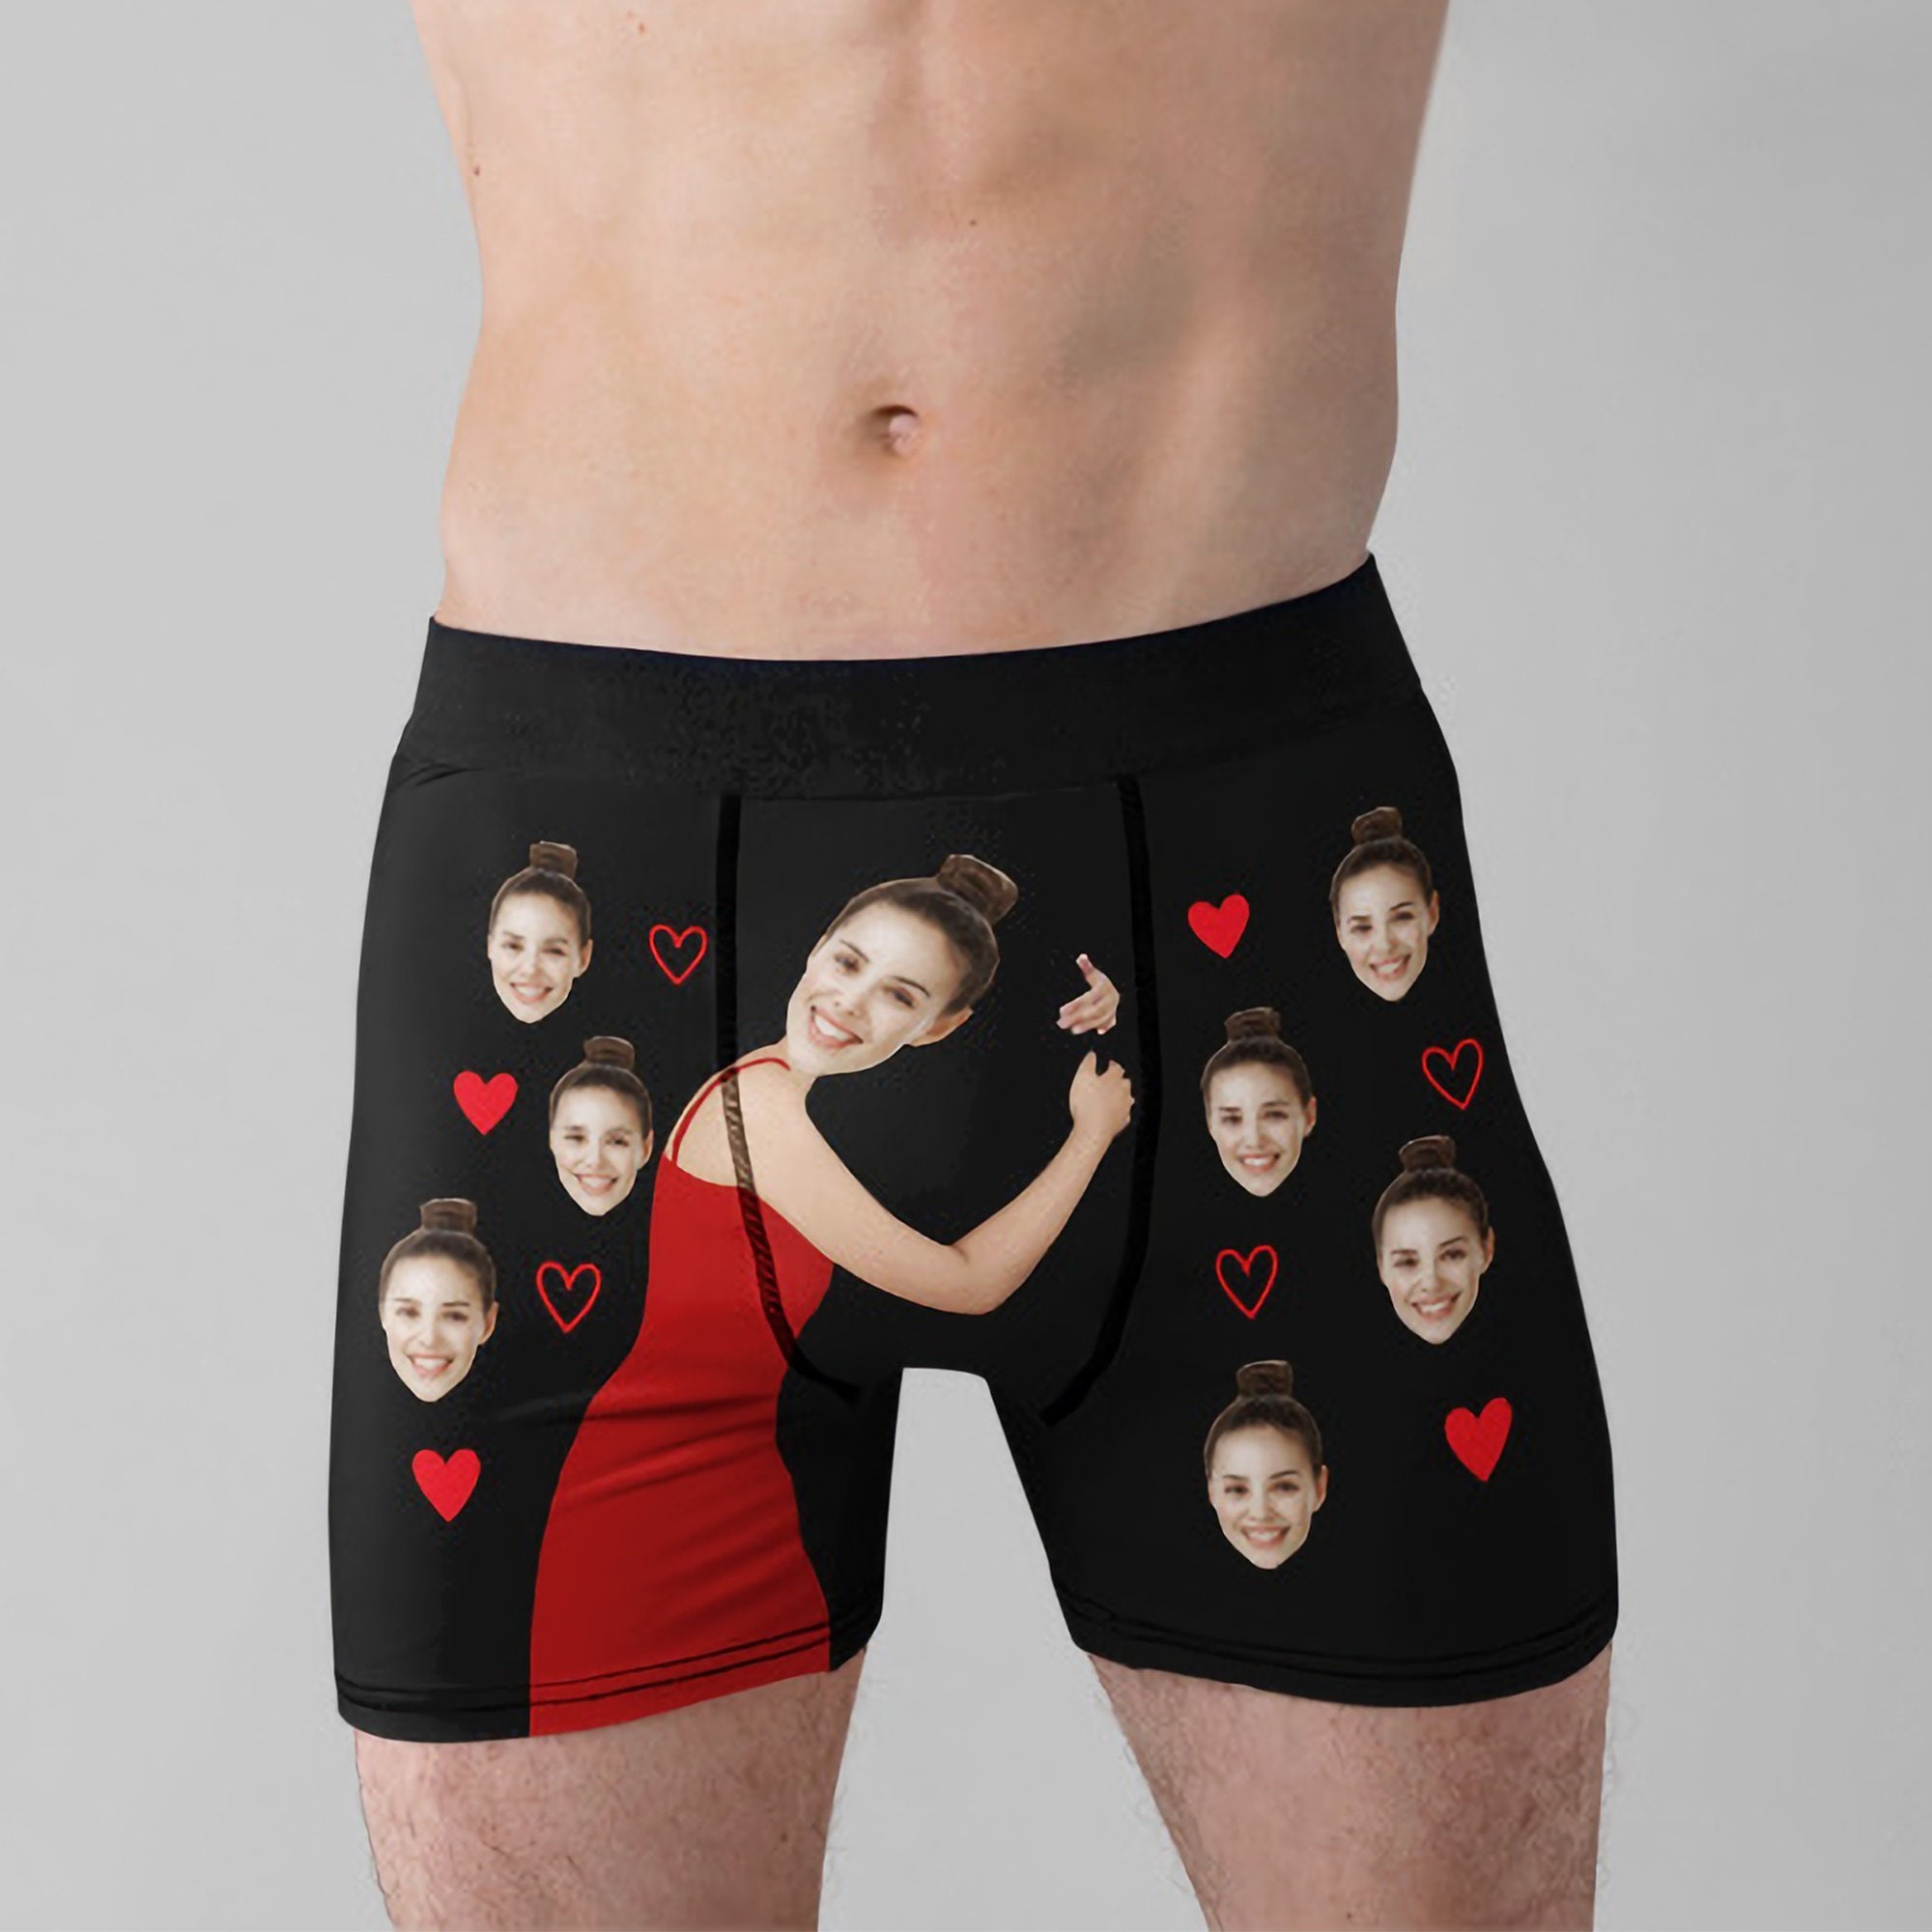 Personalized Face Underwear This Belongs To Me Face Boyfriend Boxers, Custom  Face Boxer Shorts Zipper Mens Underwear 1027 From Bailixi09, $37.13